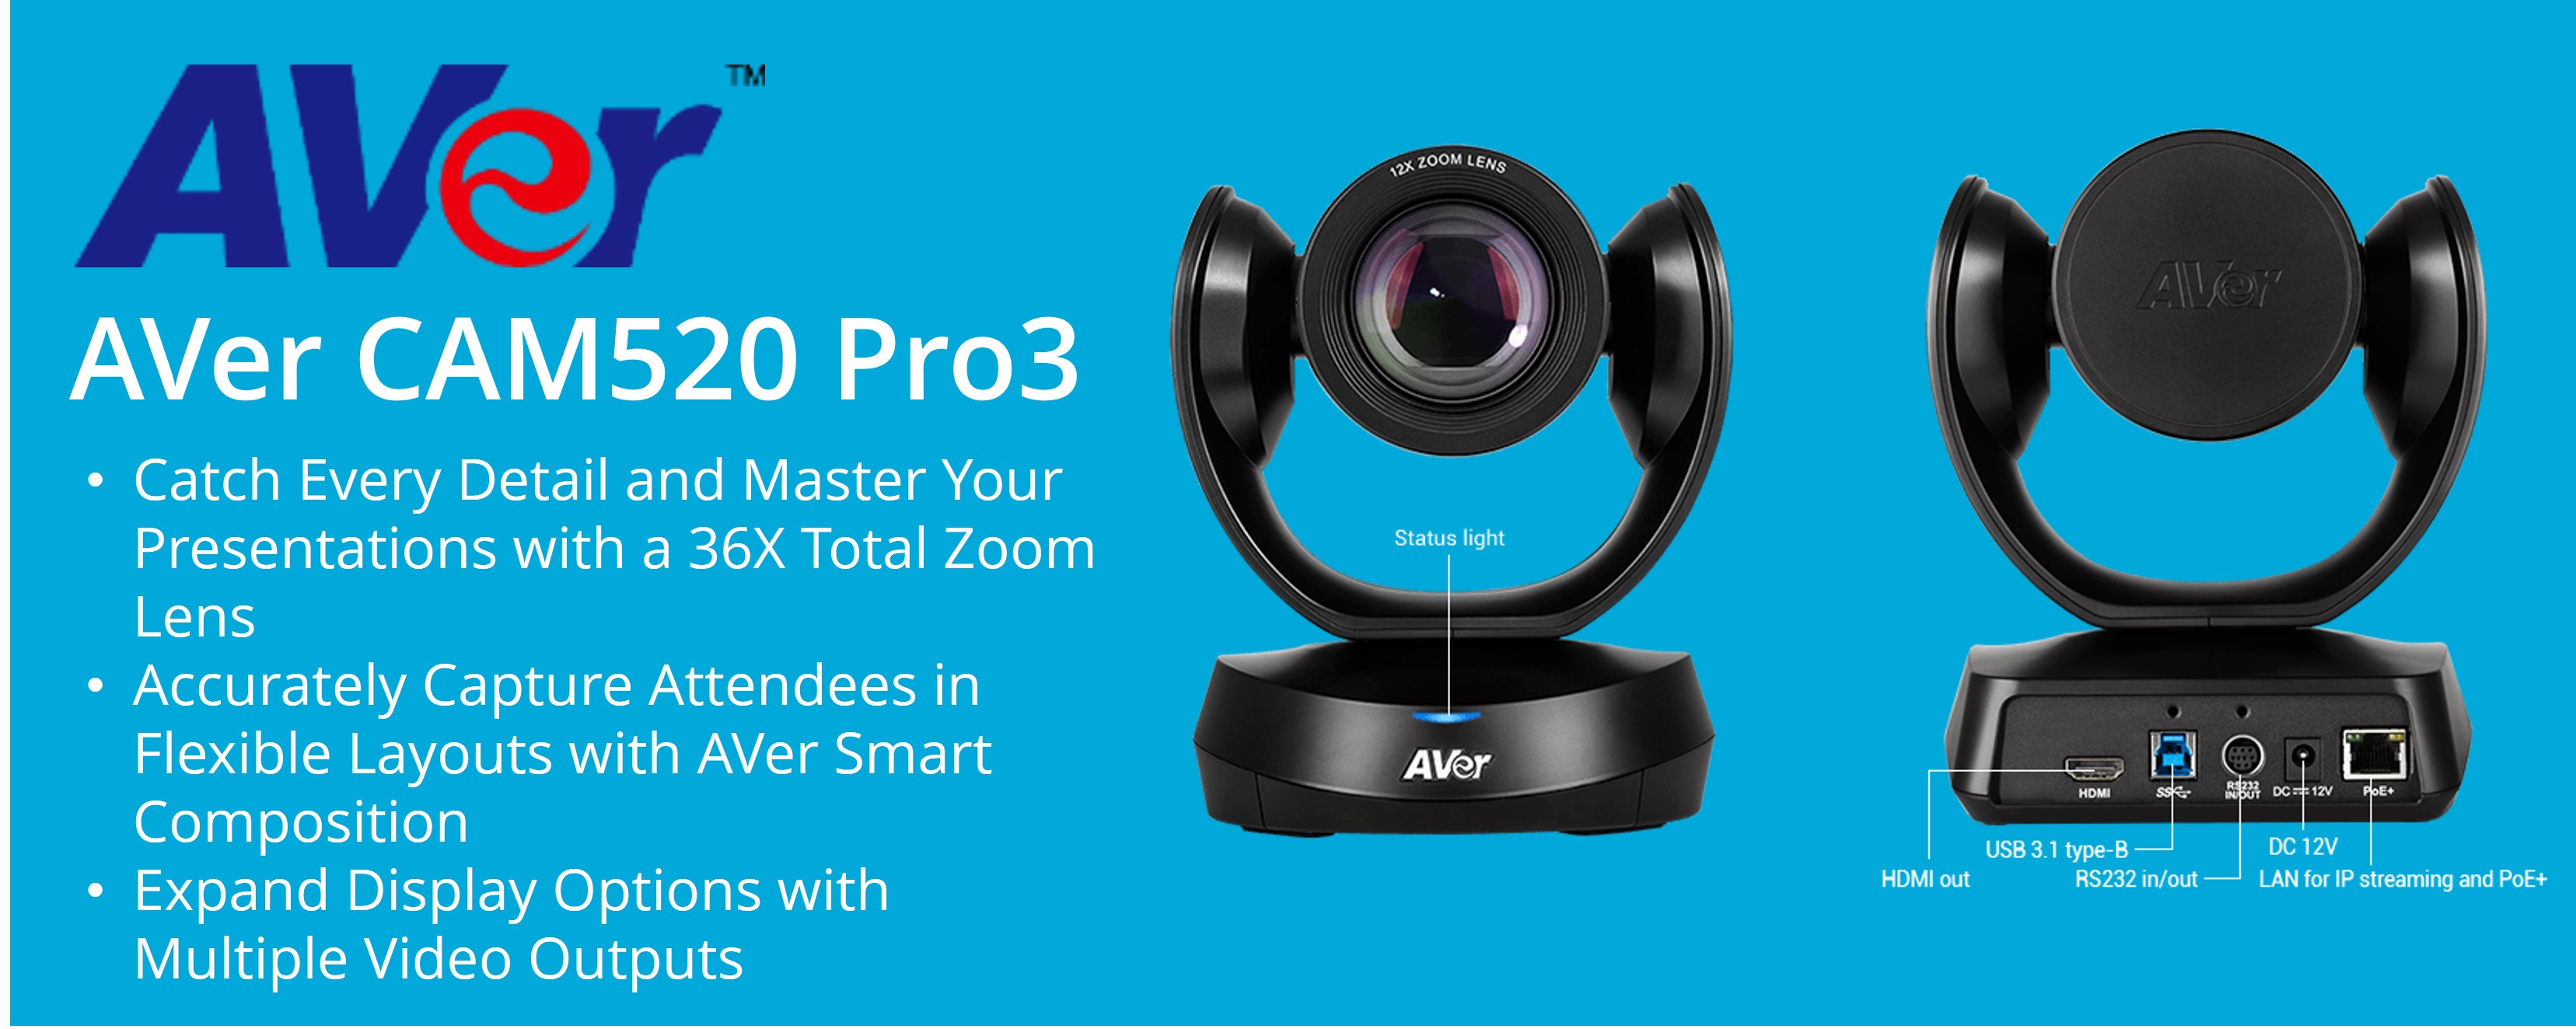 AVer CAM520 Pro3 Enterprise-Grade camera with LAN for medium to large rooms